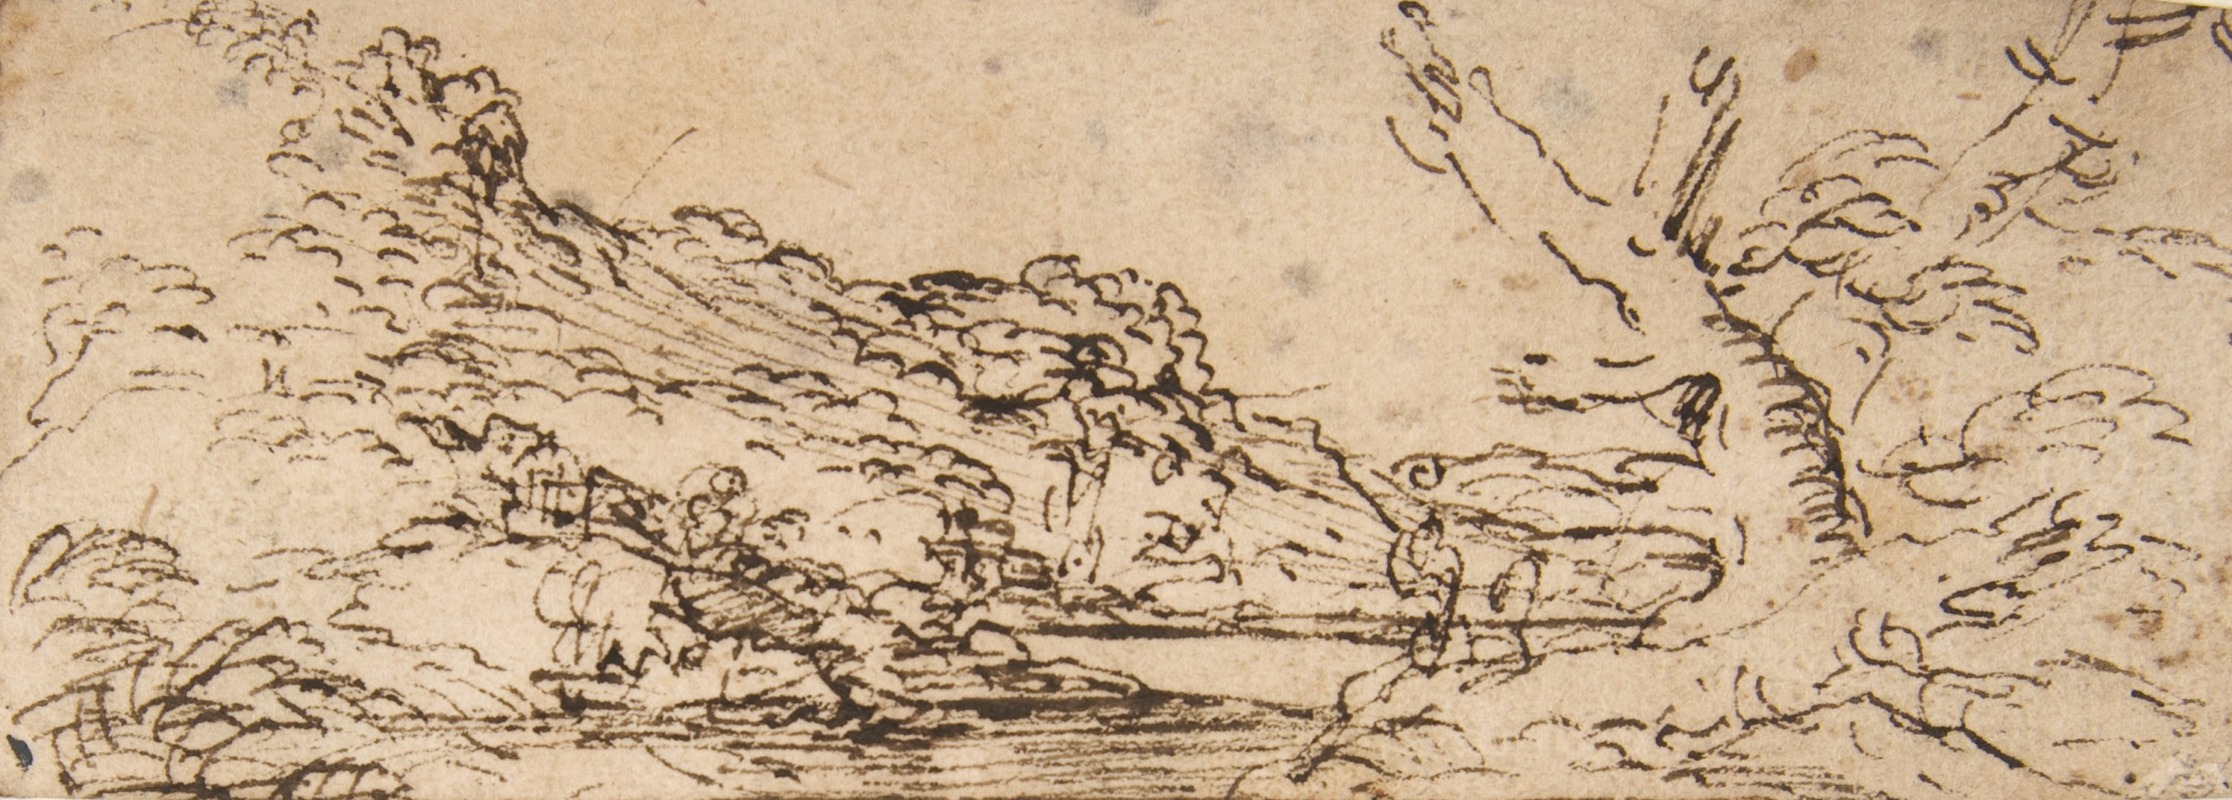 Salvator Rosa - Landscape with hills and a lake, trees in right foreground